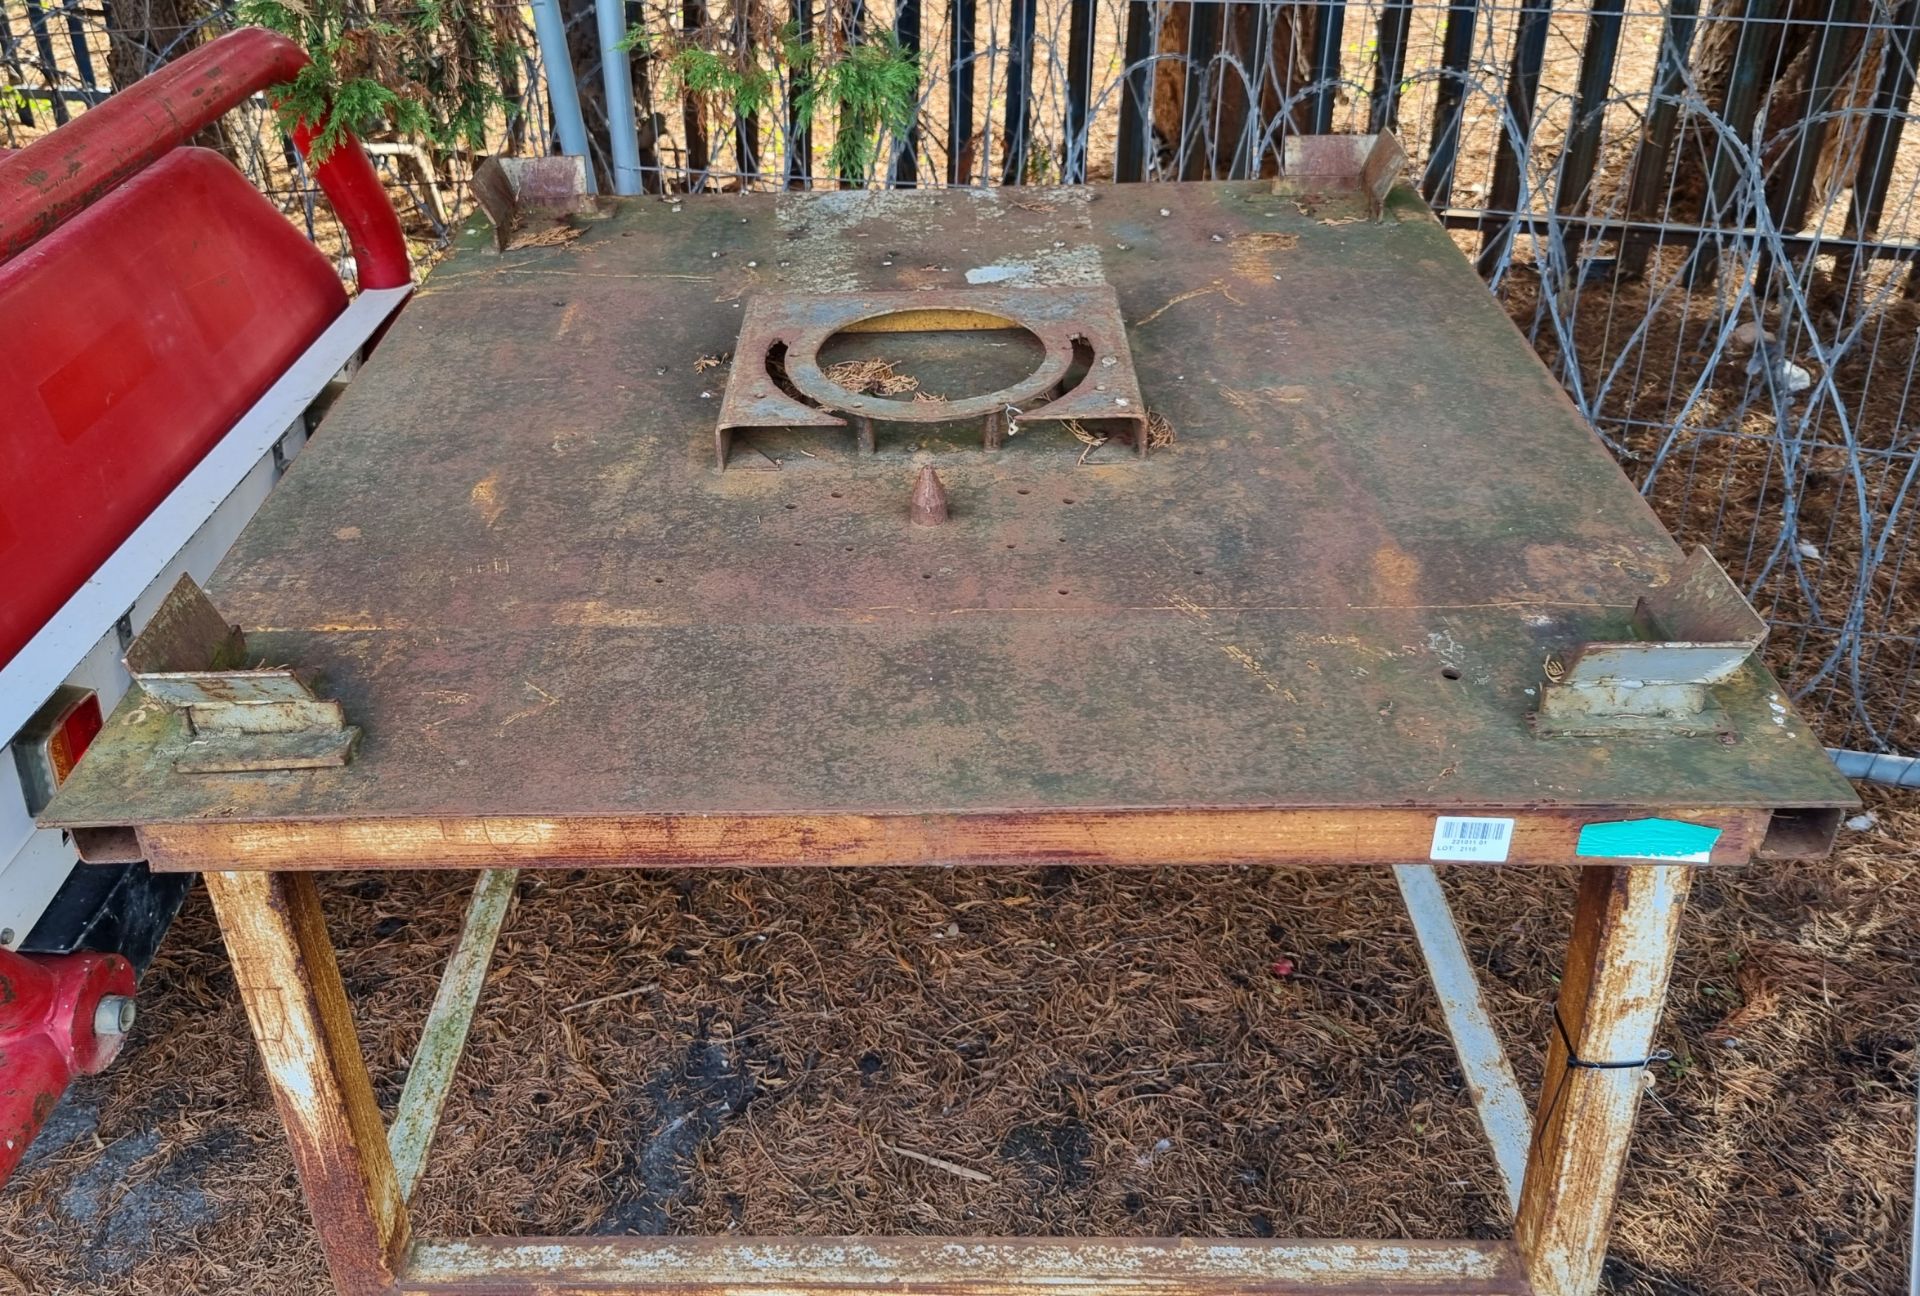 Large Steel Square Welding Table - 4ft x 4ft - Image 4 of 4